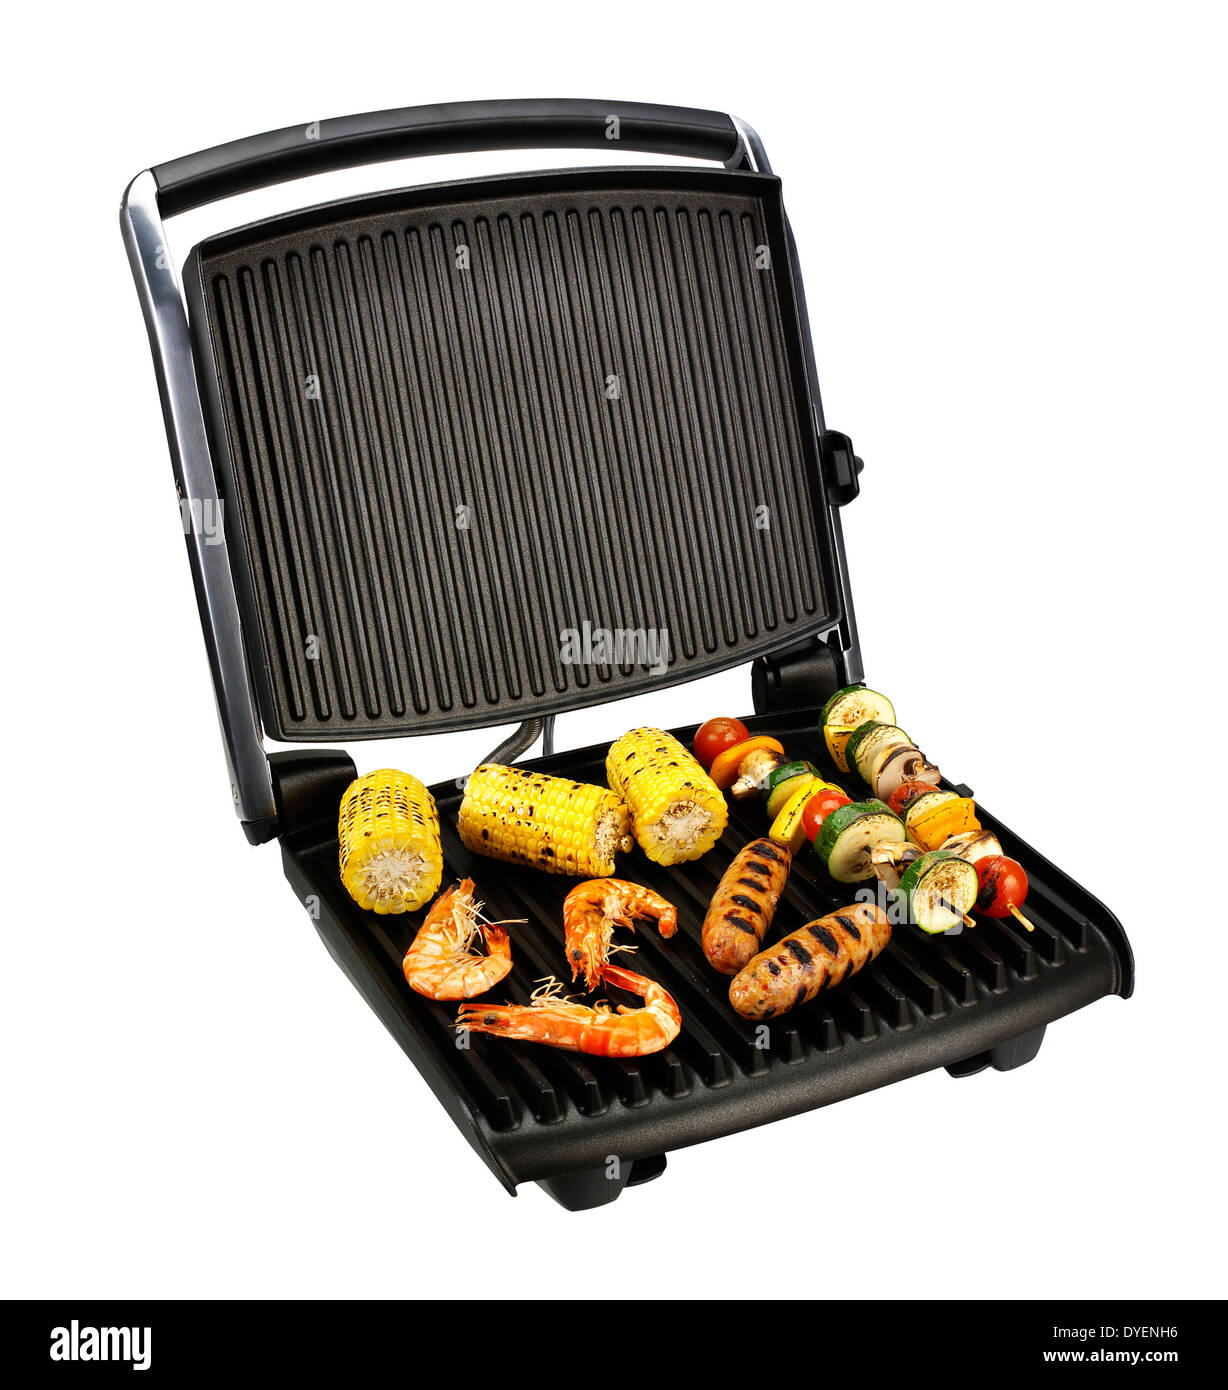 https://c8.alamy.com/comp/DYENH6/a-breville-grilling-machine-with-a-selection-of-bbq-food-on-prawns-DYENH6.jpg